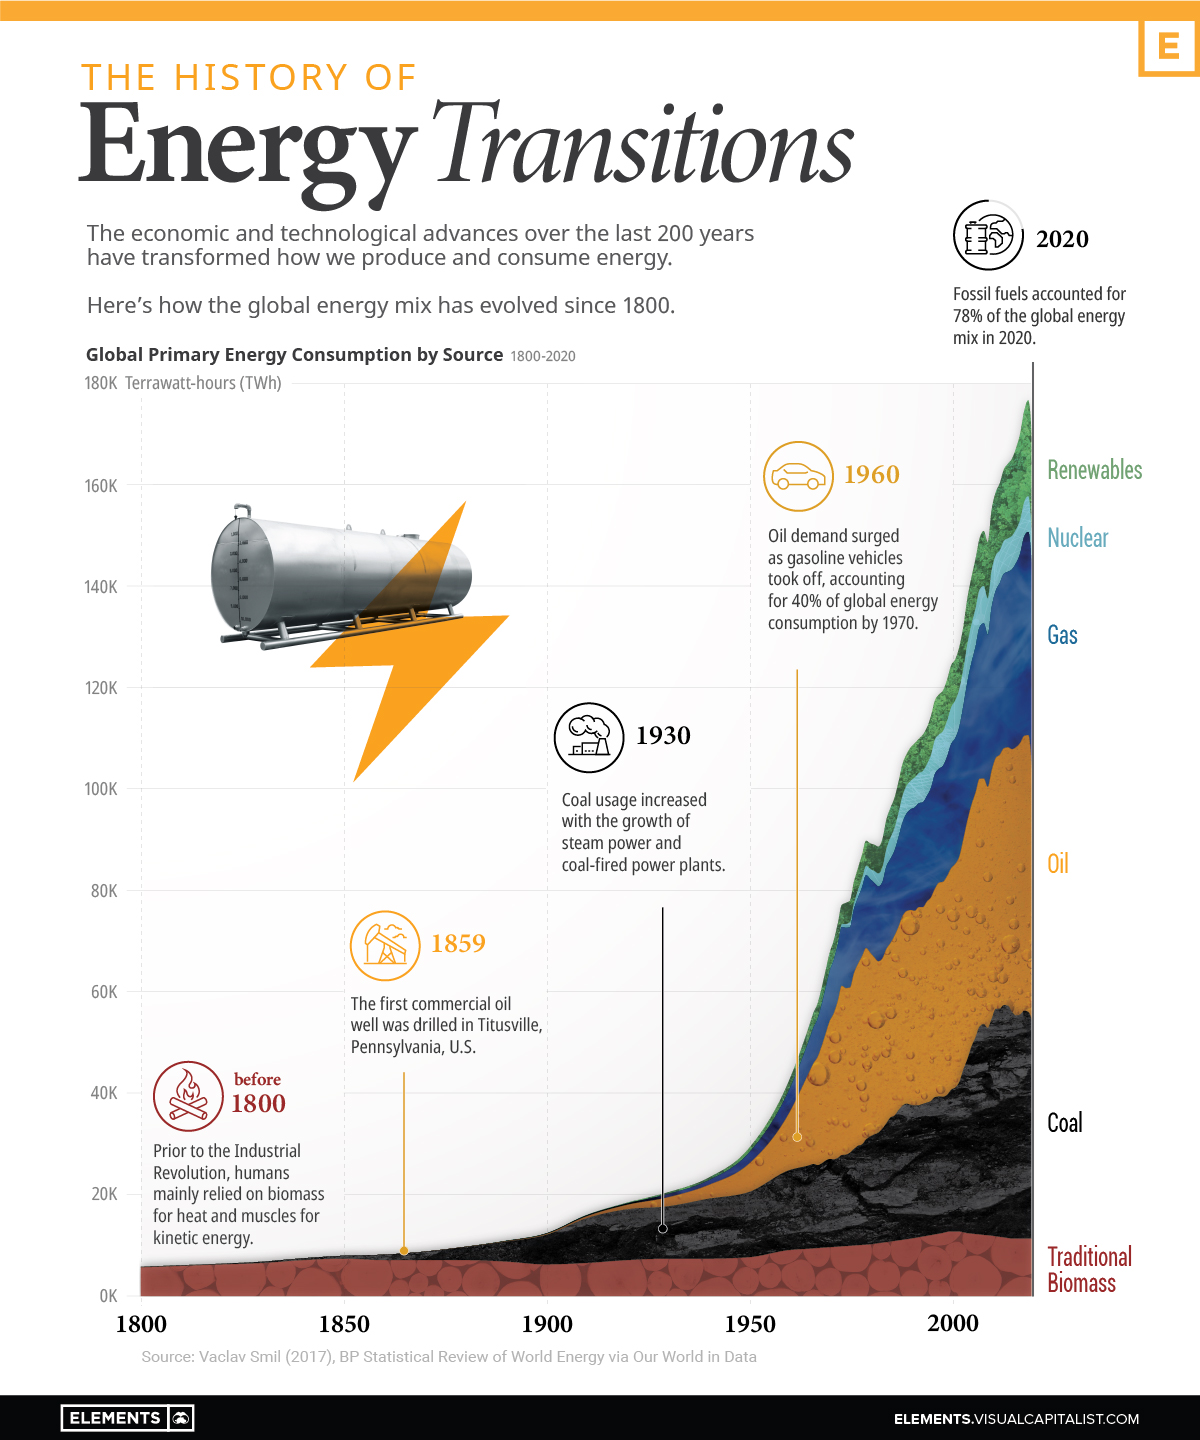 the History of Energy Transitions